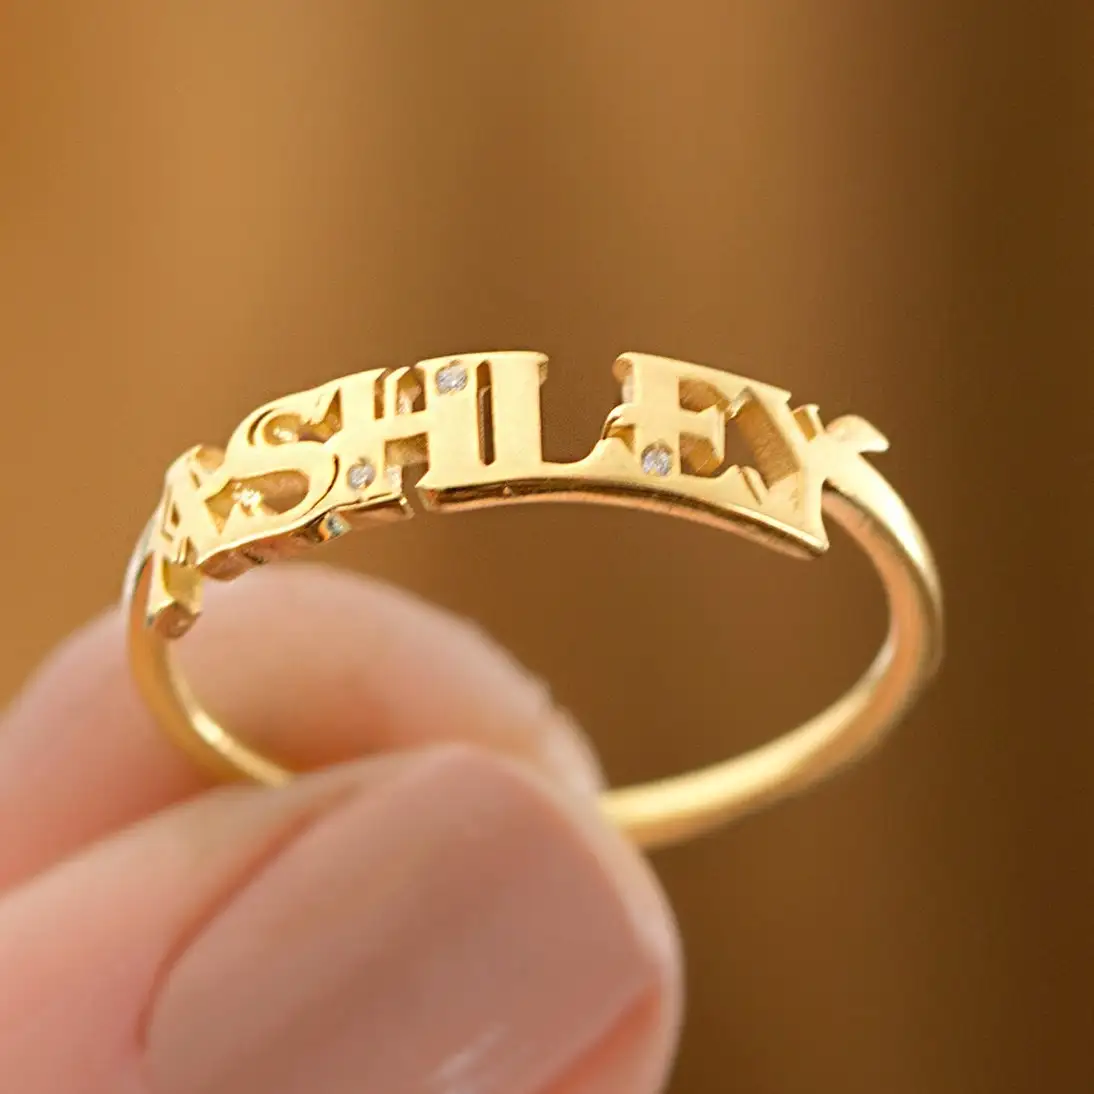 

Stainless Steel Diamond Personalized Name Ring,Custom Name Jewelry,Dainty Gold Stacking Ring,Stackable Ring Birthday Gift Women